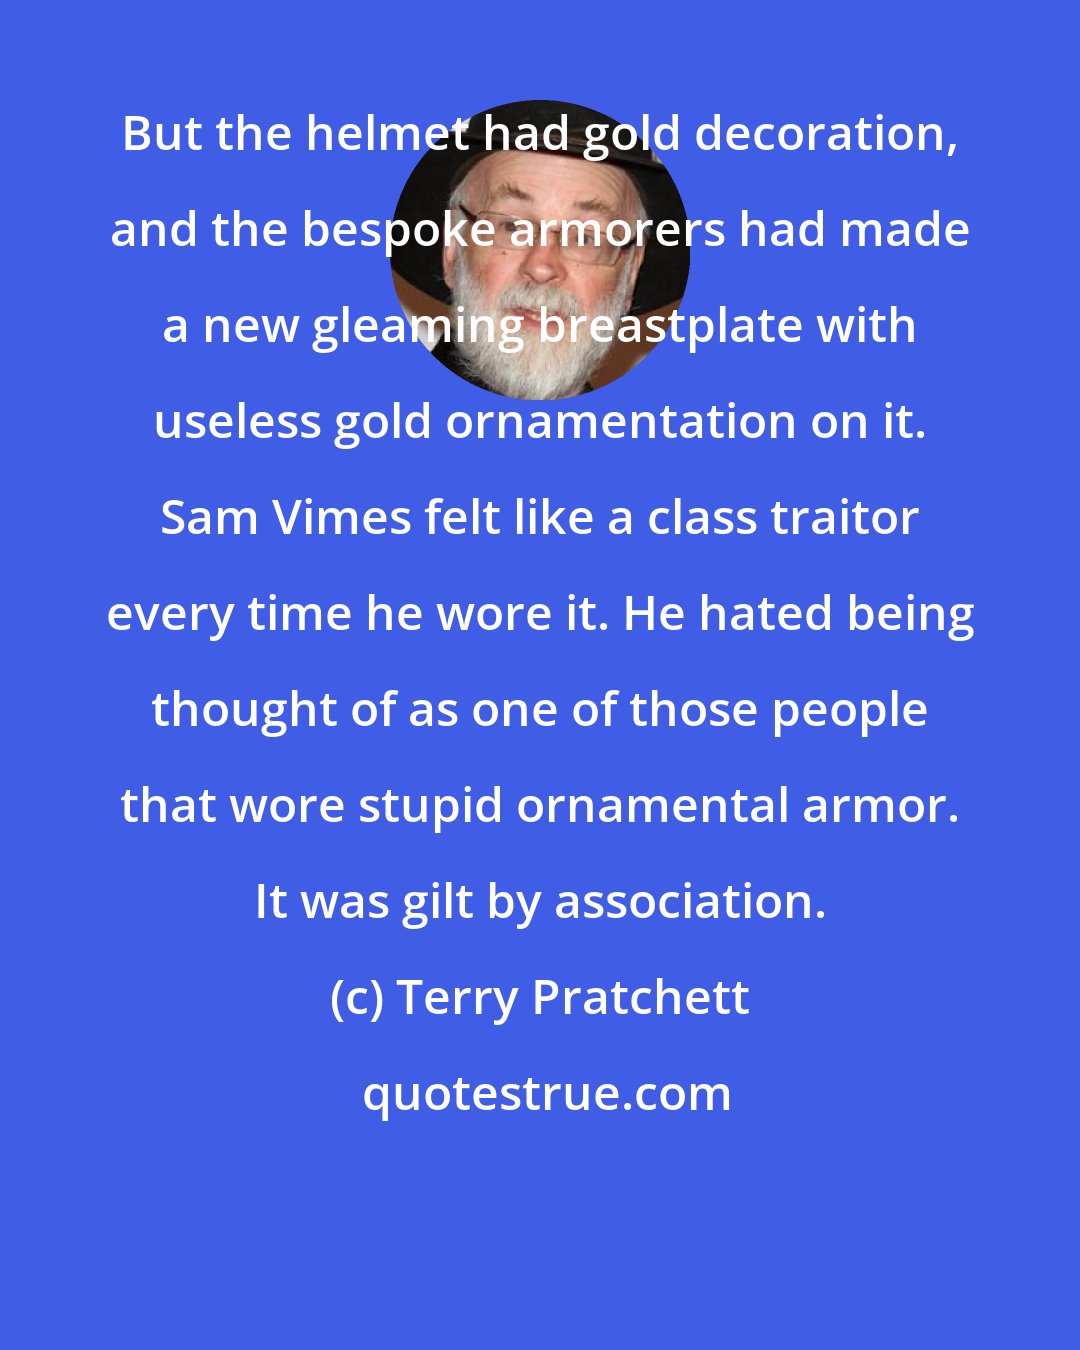 Terry Pratchett: But the helmet had gold decoration, and the bespoke armorers had made a new gleaming breastplate with useless gold ornamentation on it. Sam Vimes felt like a class traitor every time he wore it. He hated being thought of as one of those people that wore stupid ornamental armor. It was gilt by association.